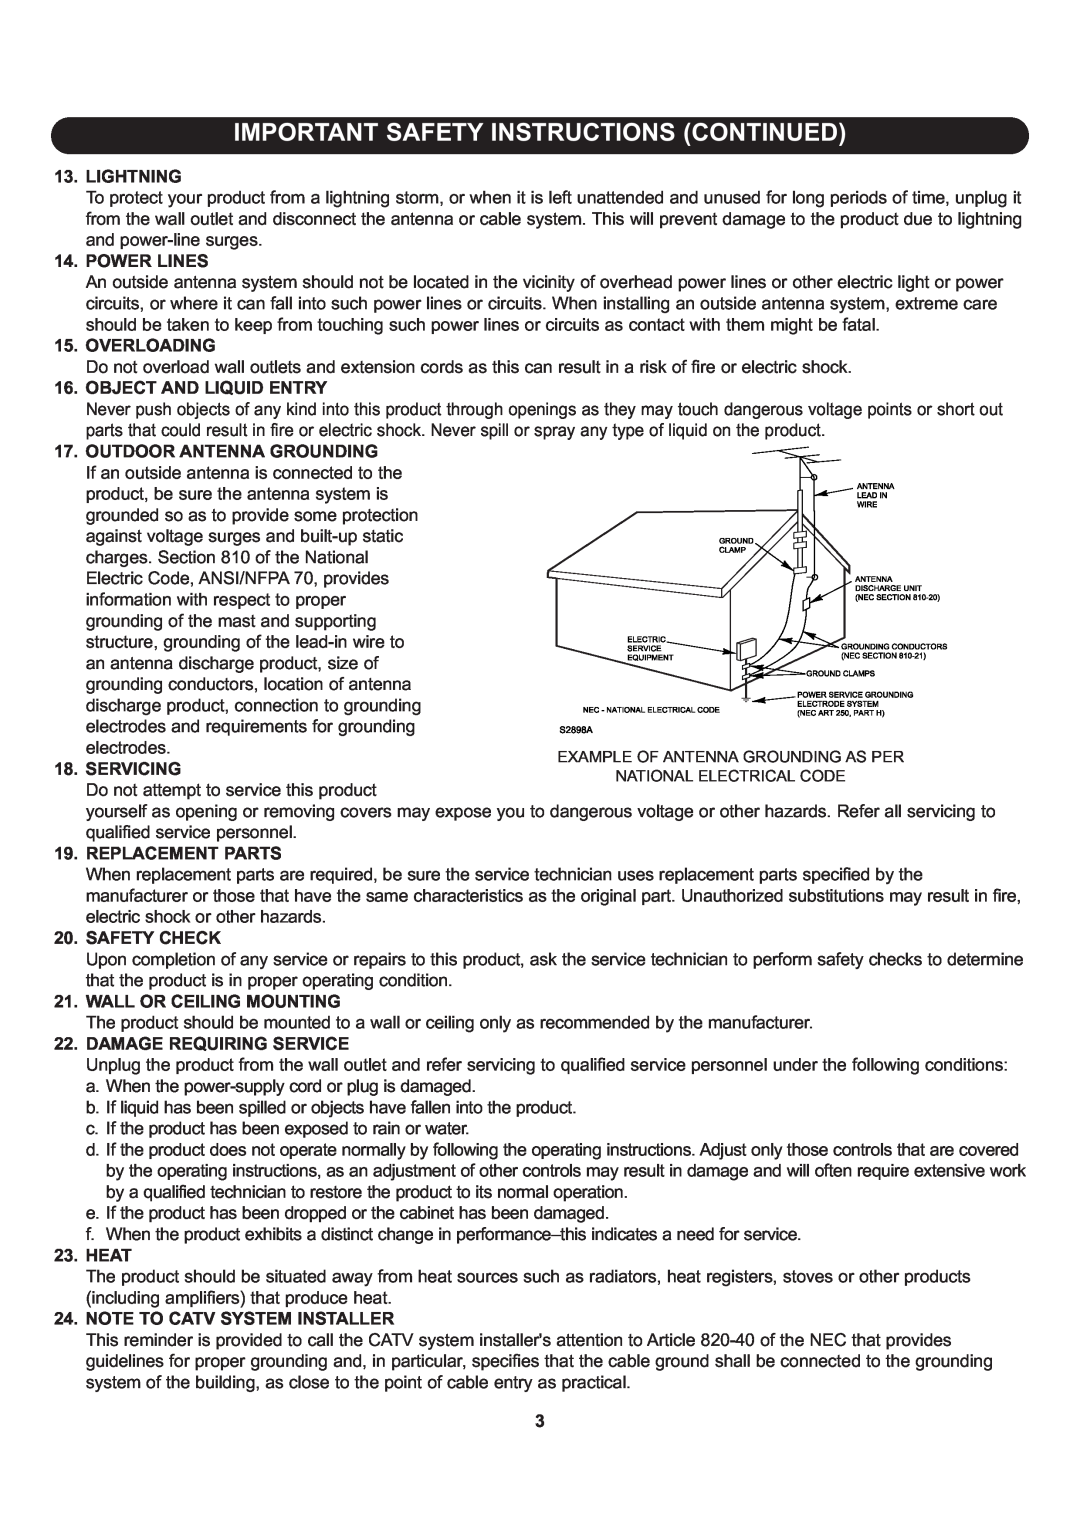 Memorex Flat Screen Tv manual Important Safety Instructions Continued, Lightning 